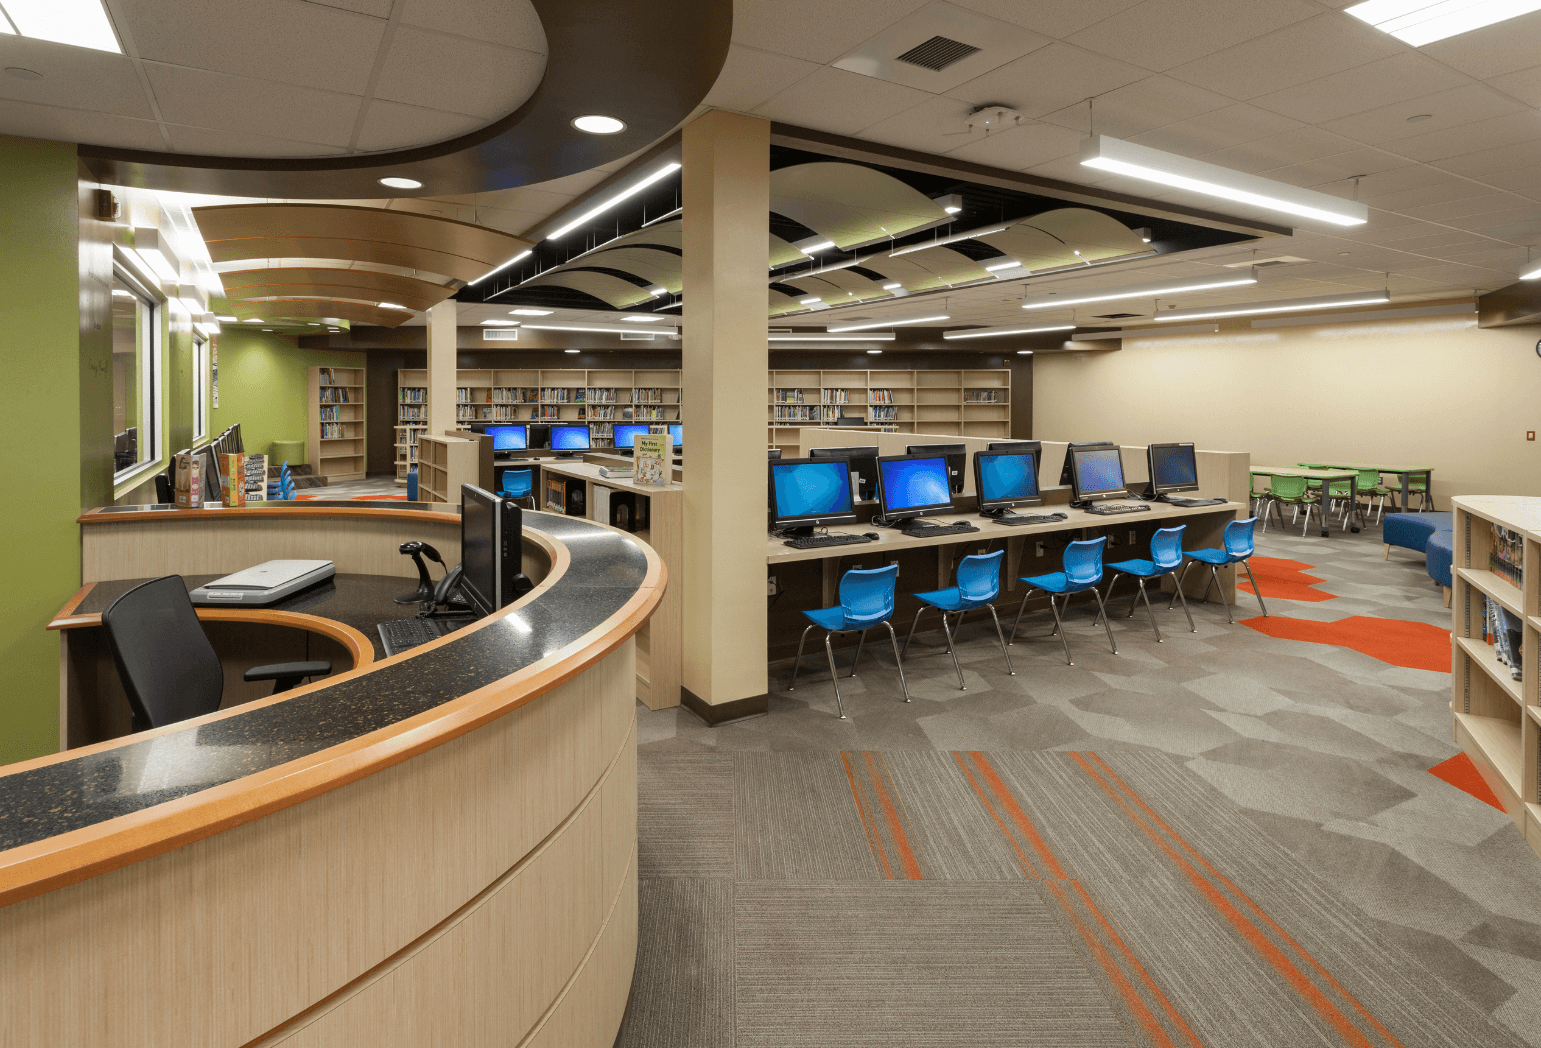 A school library with a front desk, computers, and bookshelves.